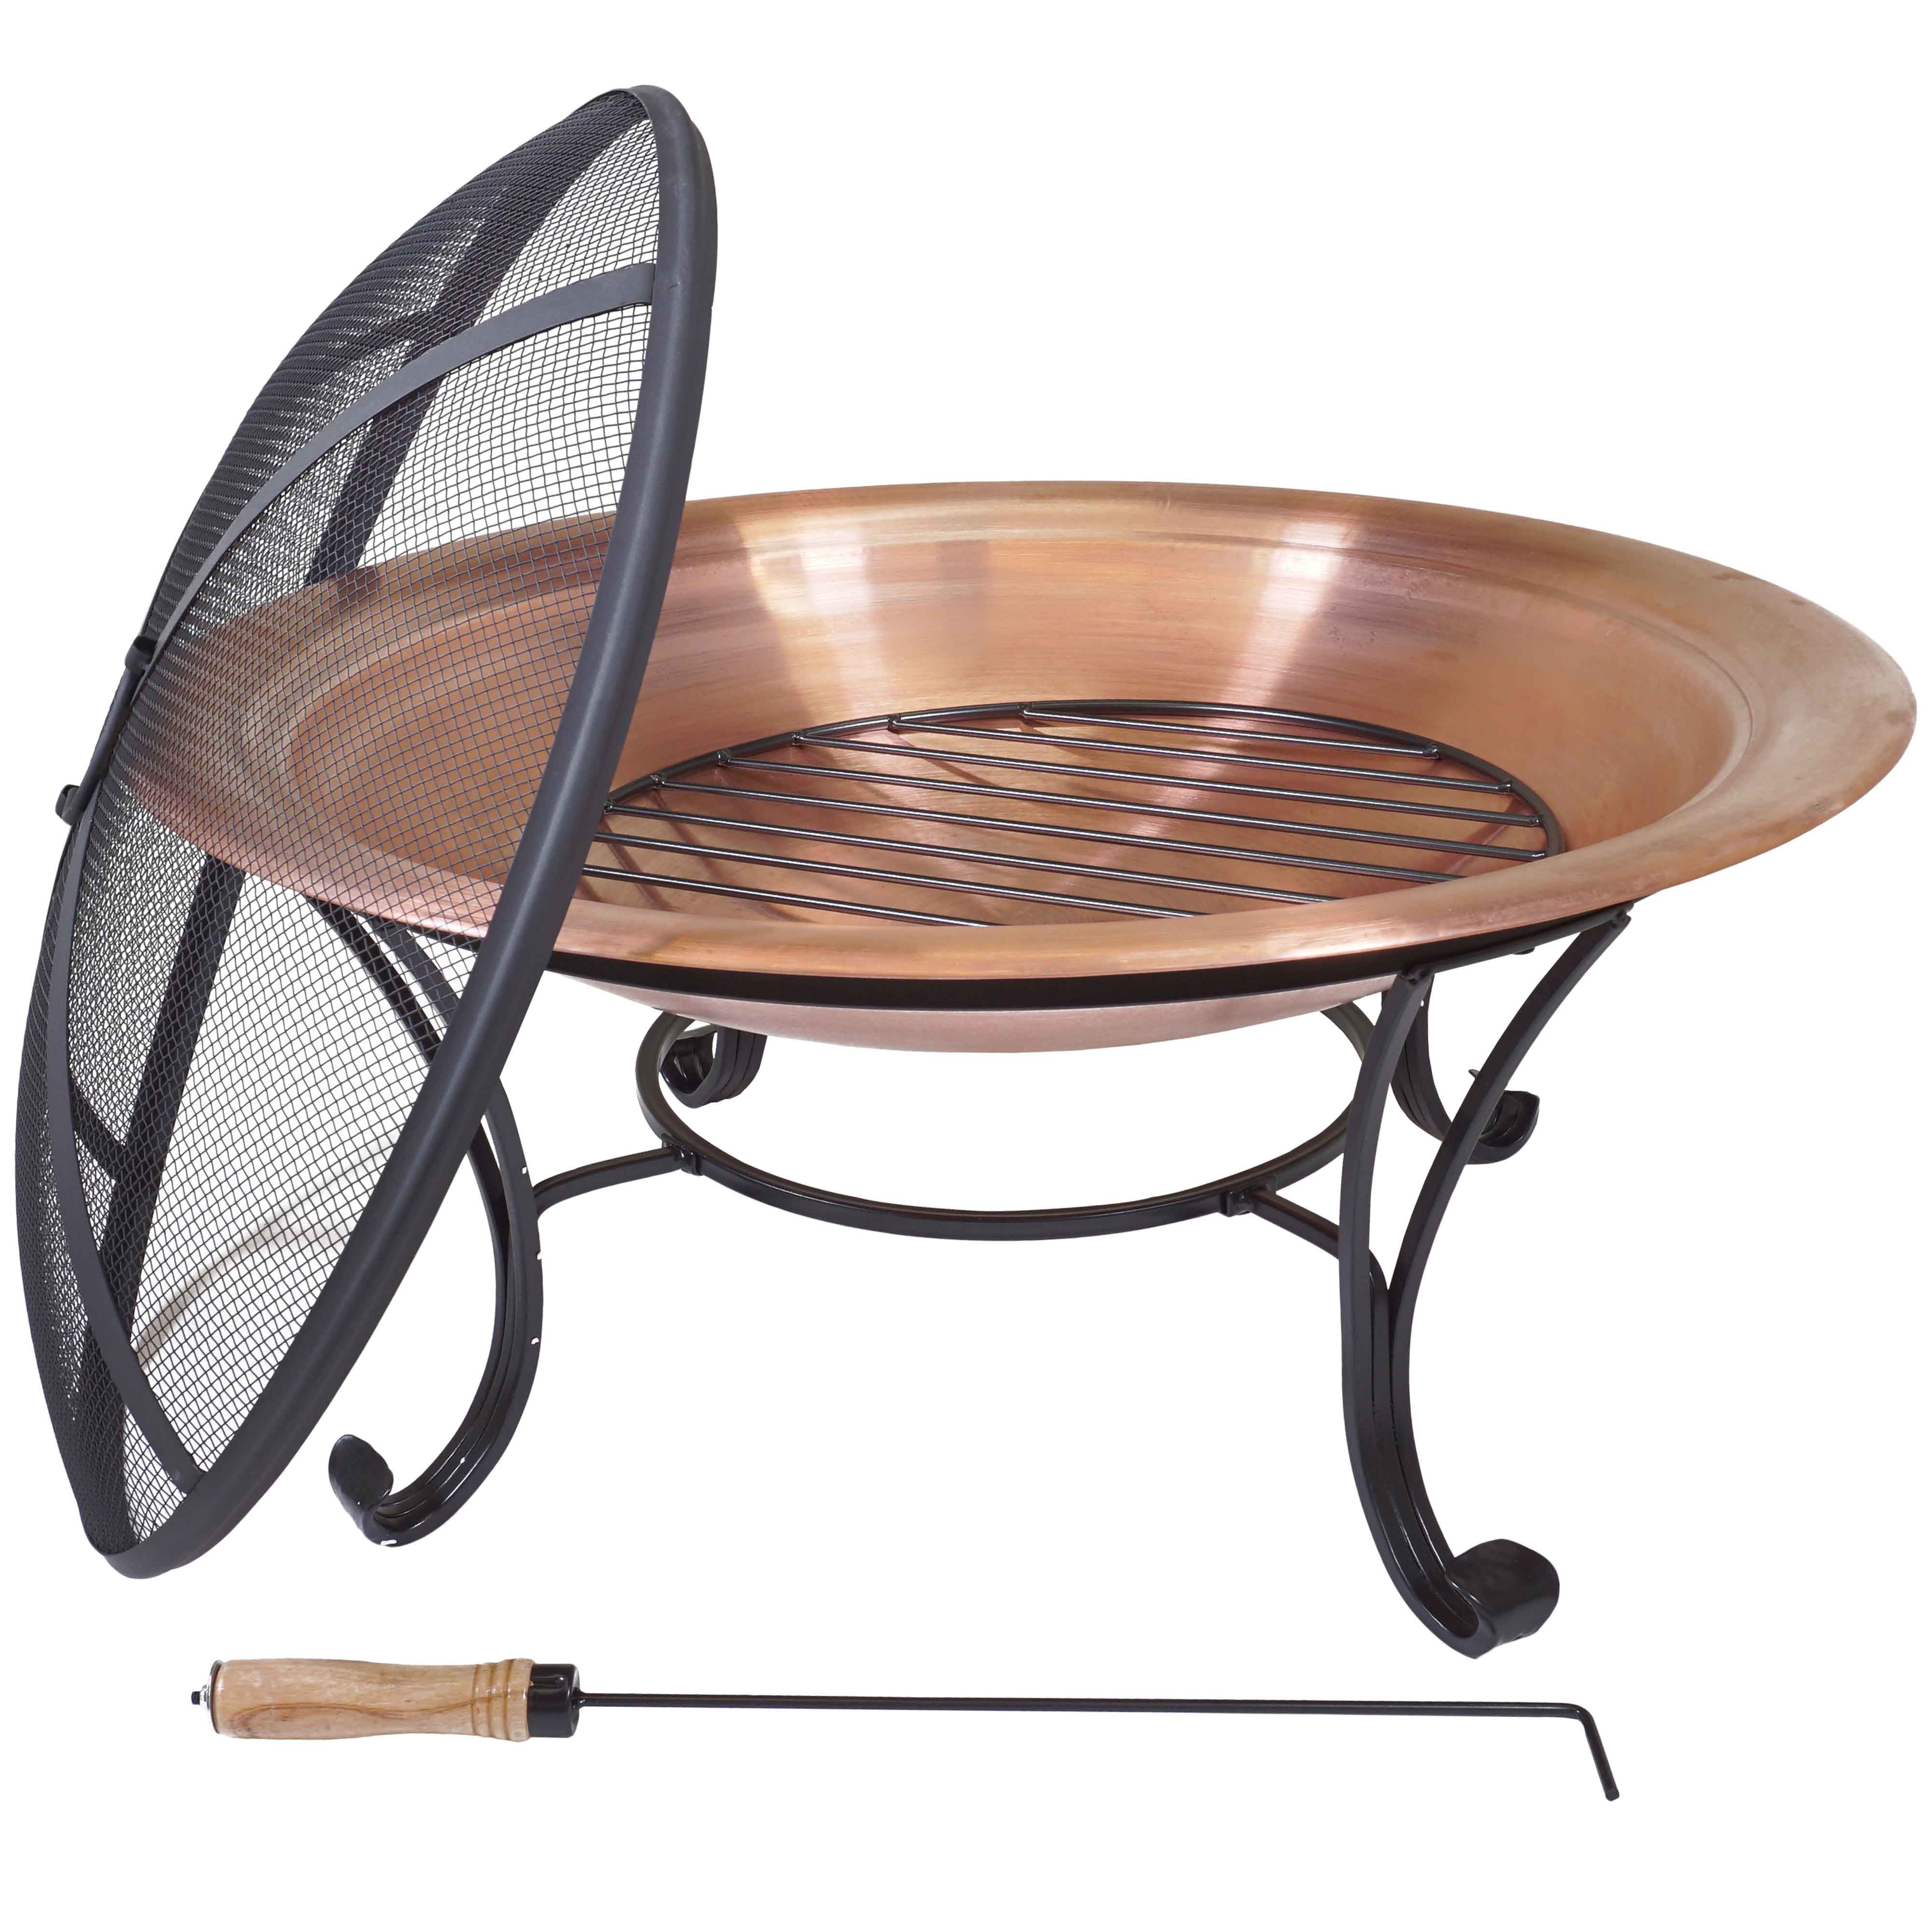 Copper Fire Ring Outdoor Pit, Solid Copper Fire Pit